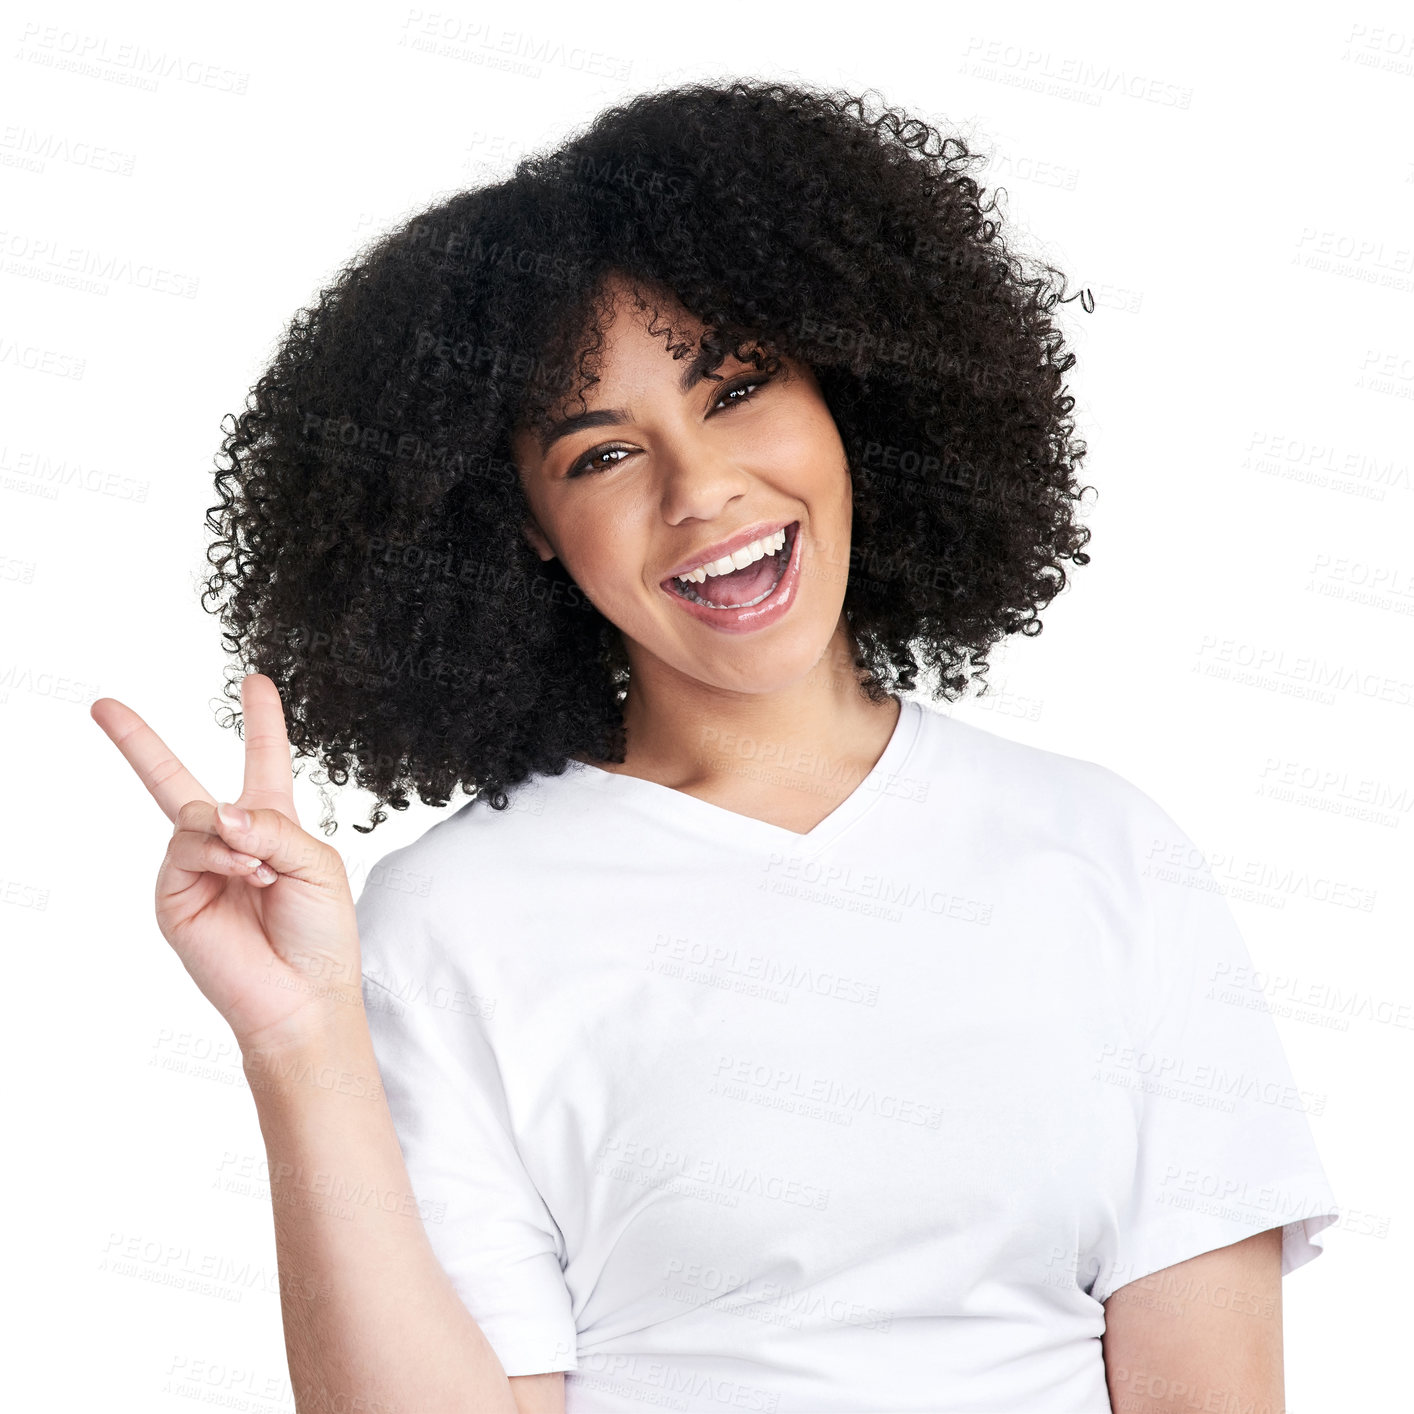 Buy stock photo Studio shot of an attractive young woman making a peace gesture against a white background